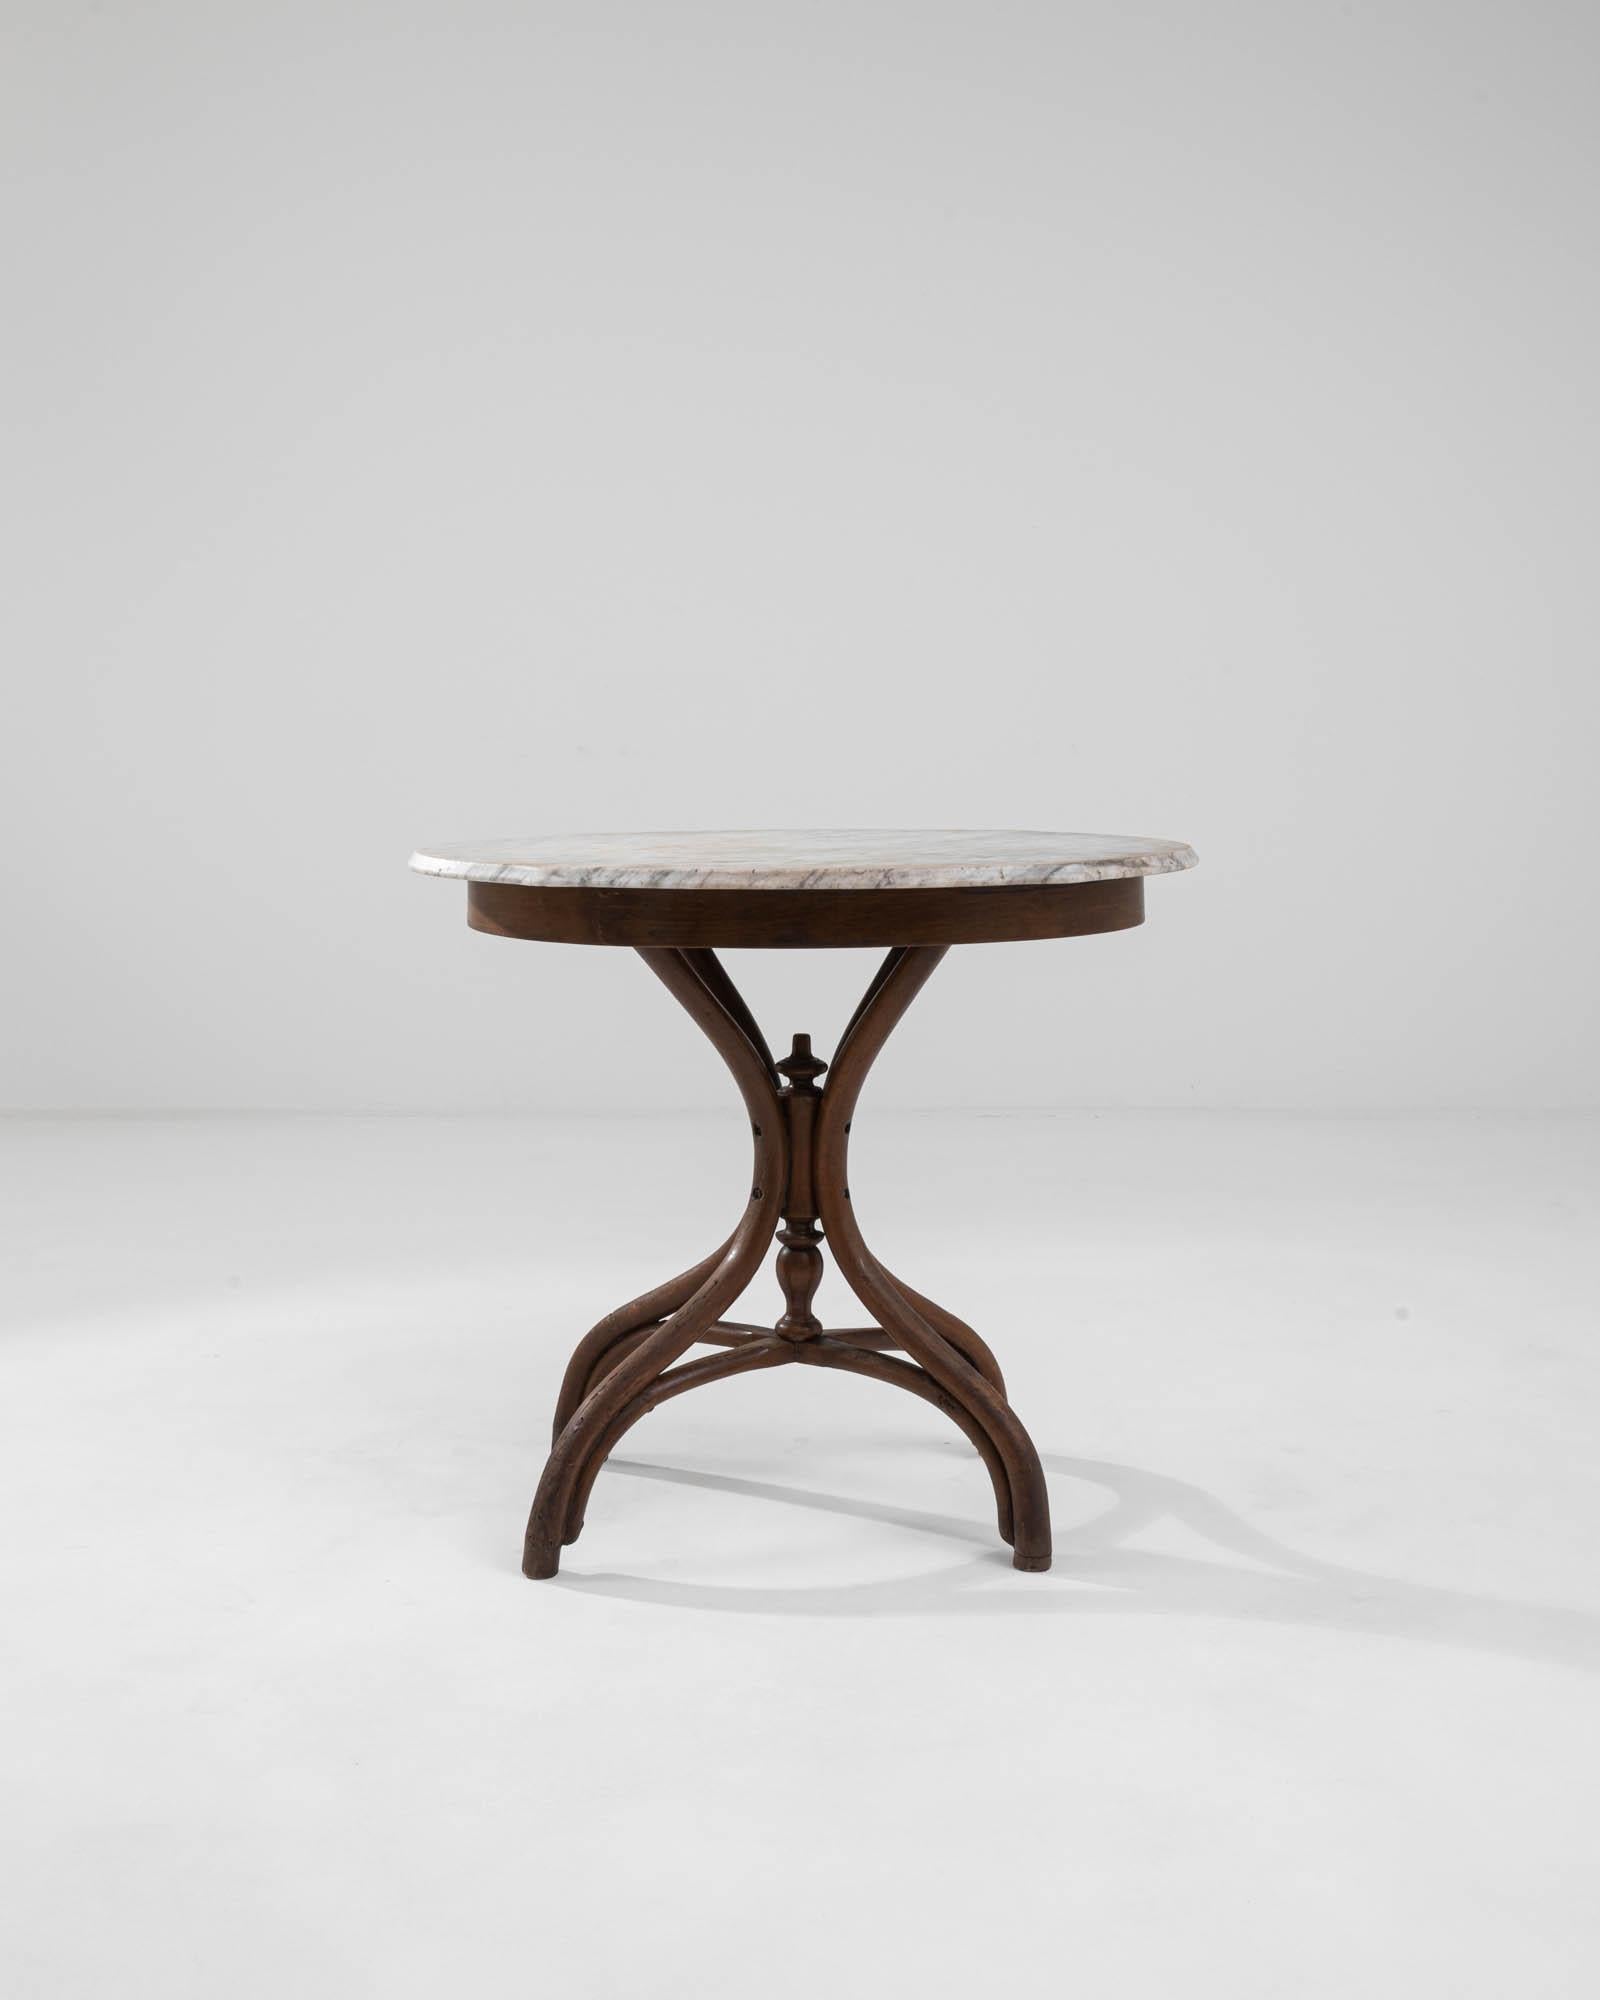 A wooden side table with a marble top from 20th century Austria, made in the style of Thonet. Four, steam-bent legs swoop downwards from this marble-topped table, elegantly joining together and then splaying apart to provide a study and eye-pleasing